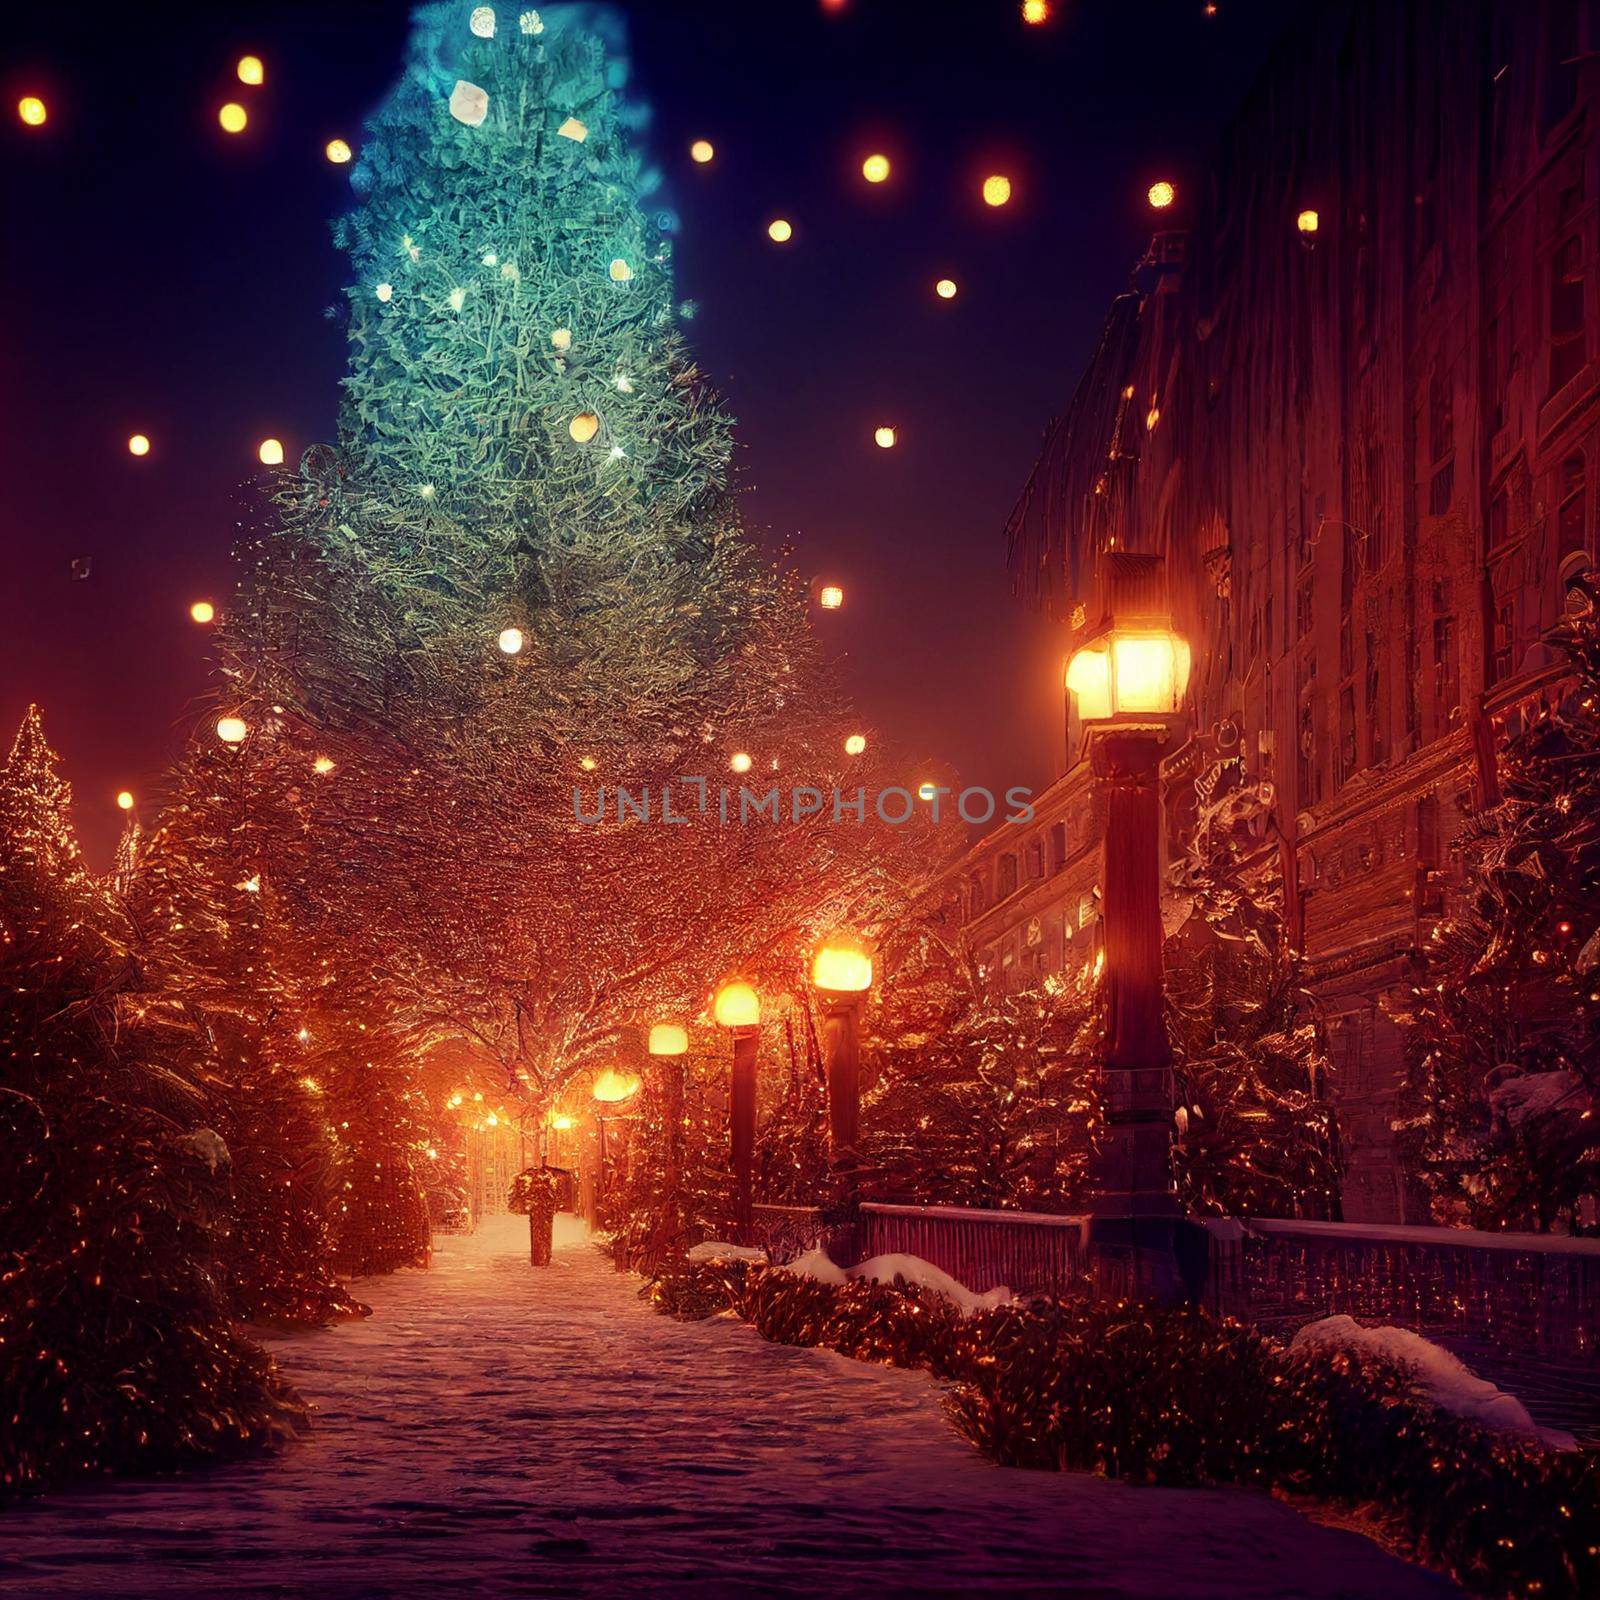 Abstract image of a winter street at christmas by NeuroSky